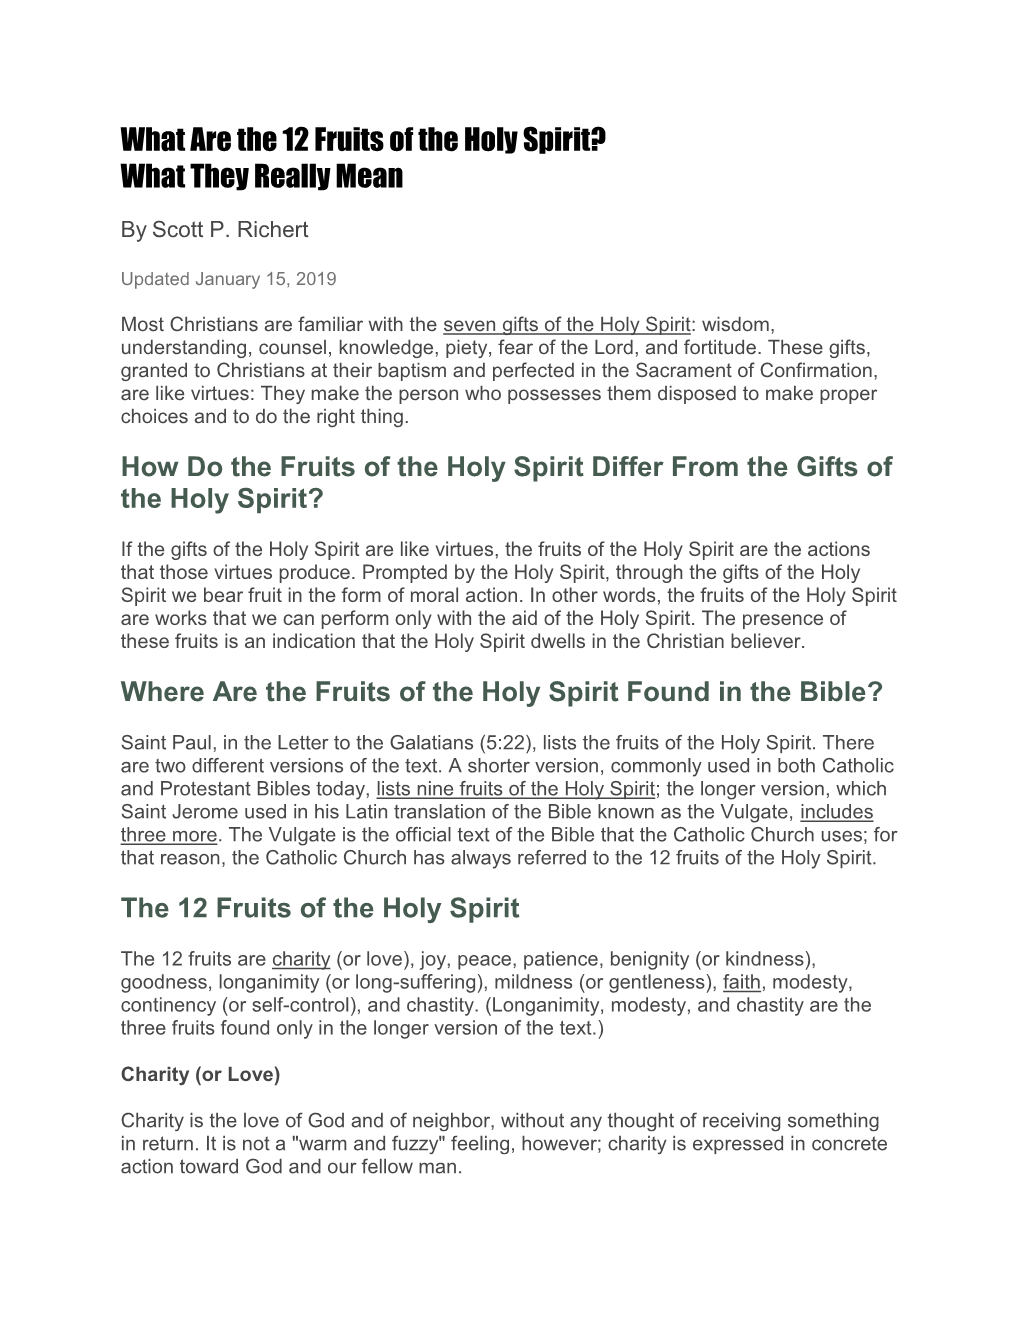 what-are-the-12-fruits-of-the-holy-spirit-what-they-really-mean-docslib